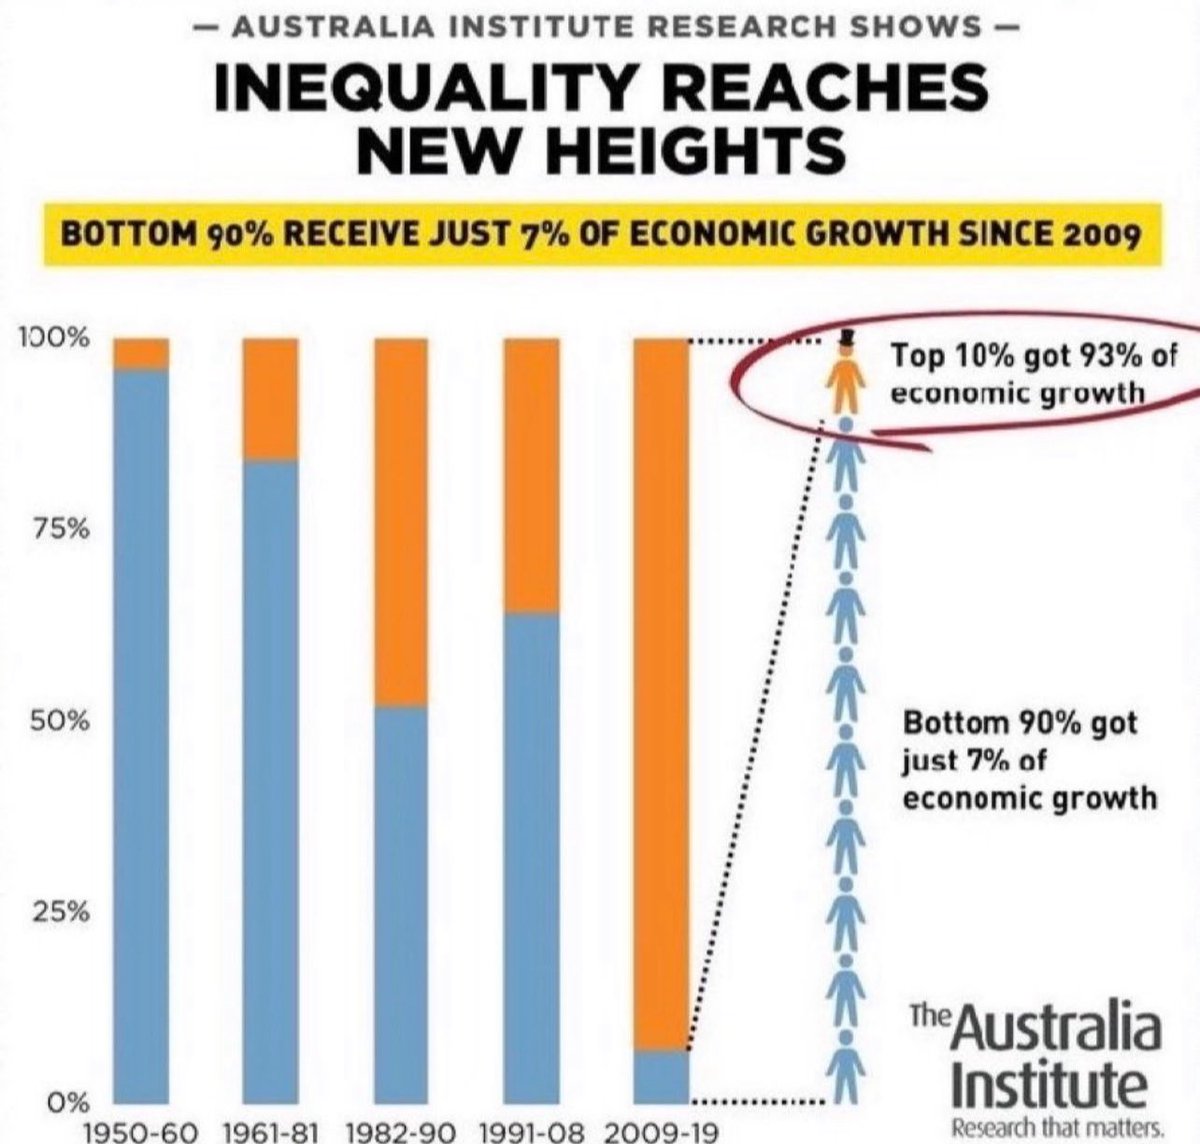 @MichaelPascoe01 Well said Michael. 

It has become apparent in the last 15 years that regression, not progression was the key to electoral victory. 

We need to change this ASAP. 

This chart is on a terrible trajectory.